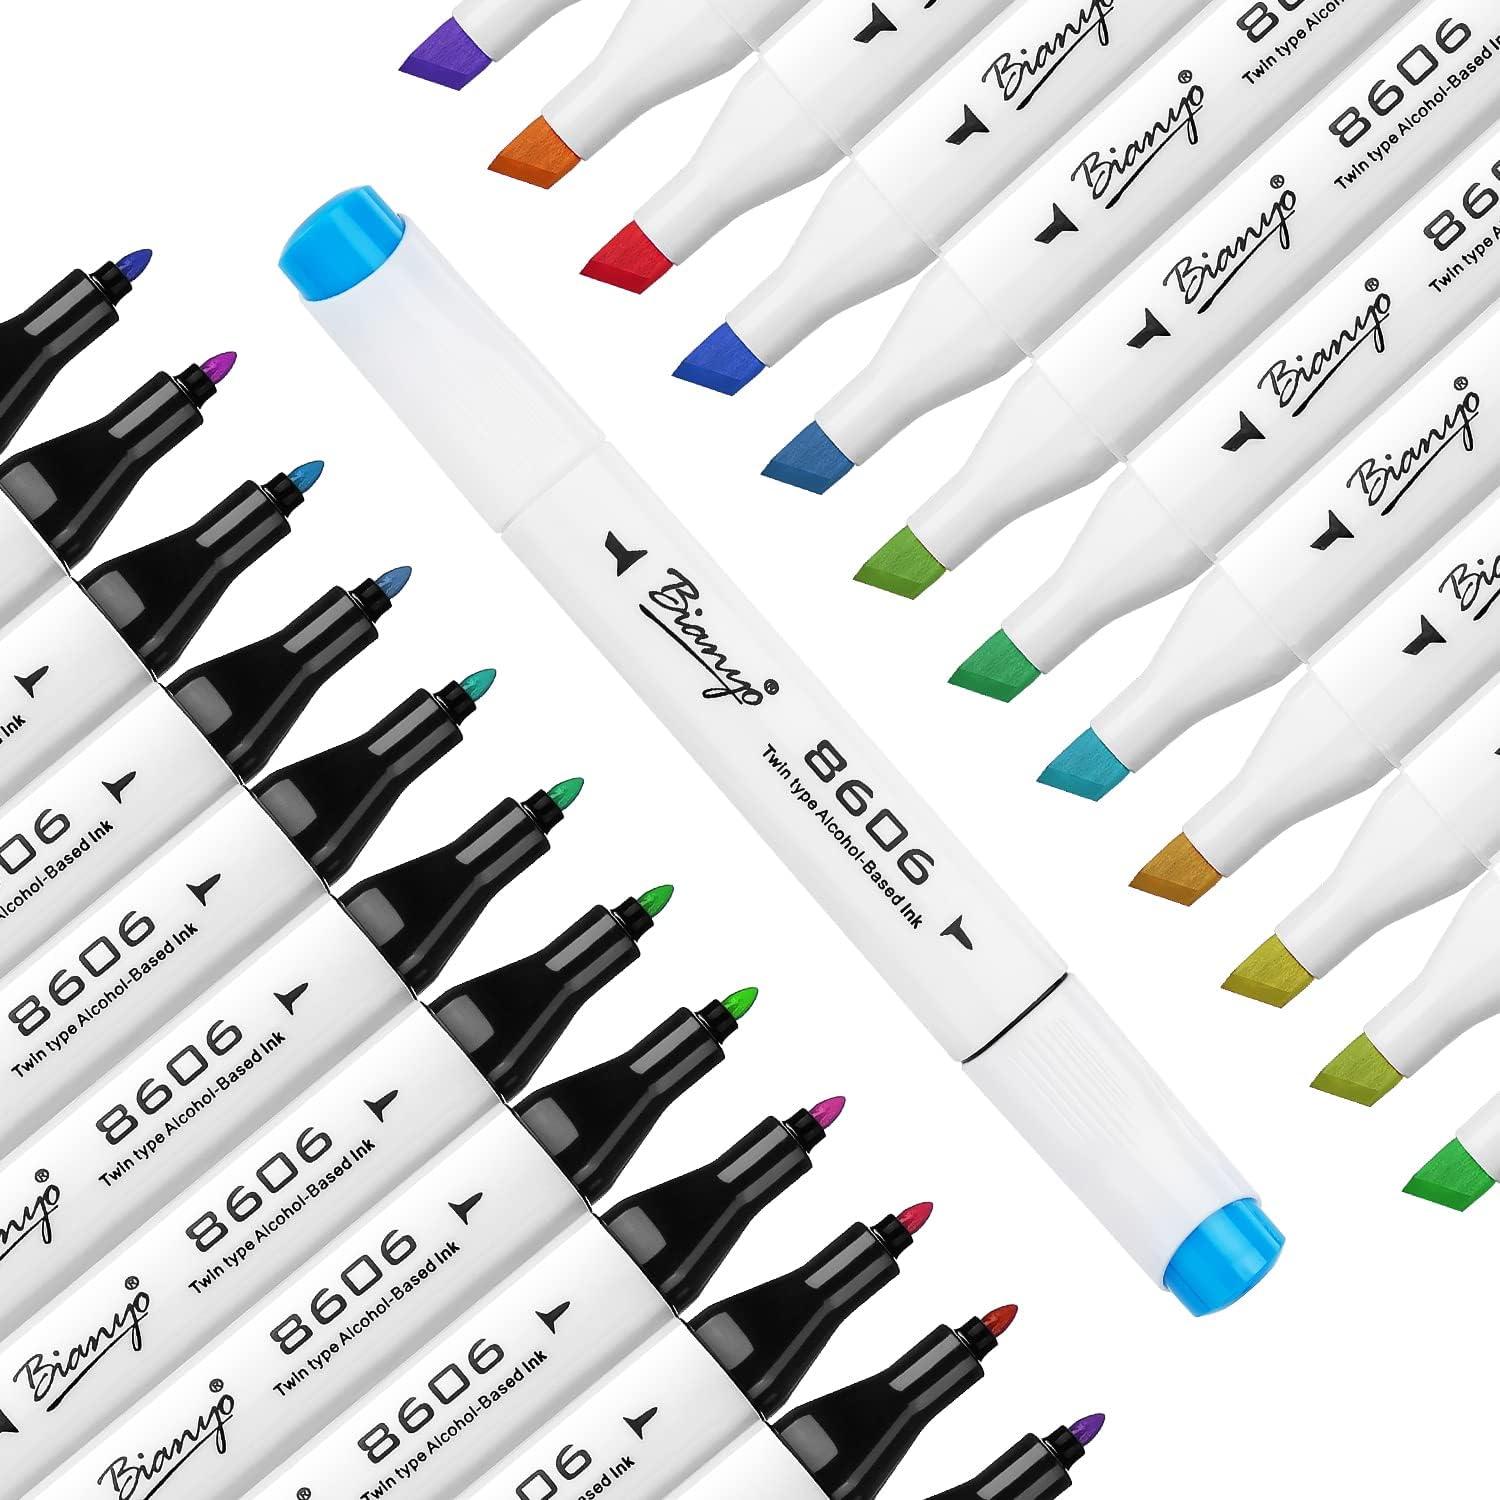 Bianyo 72 Pastel Markers Alcohol Marker Set Dual Tip Art Markers Set  Alcohol-Based Ink Permanent Marker with Premium Grey Bag for Adults Kids  Amateurs Coloring Drawing Outlining highlighting 72 Pastel Colors Gre